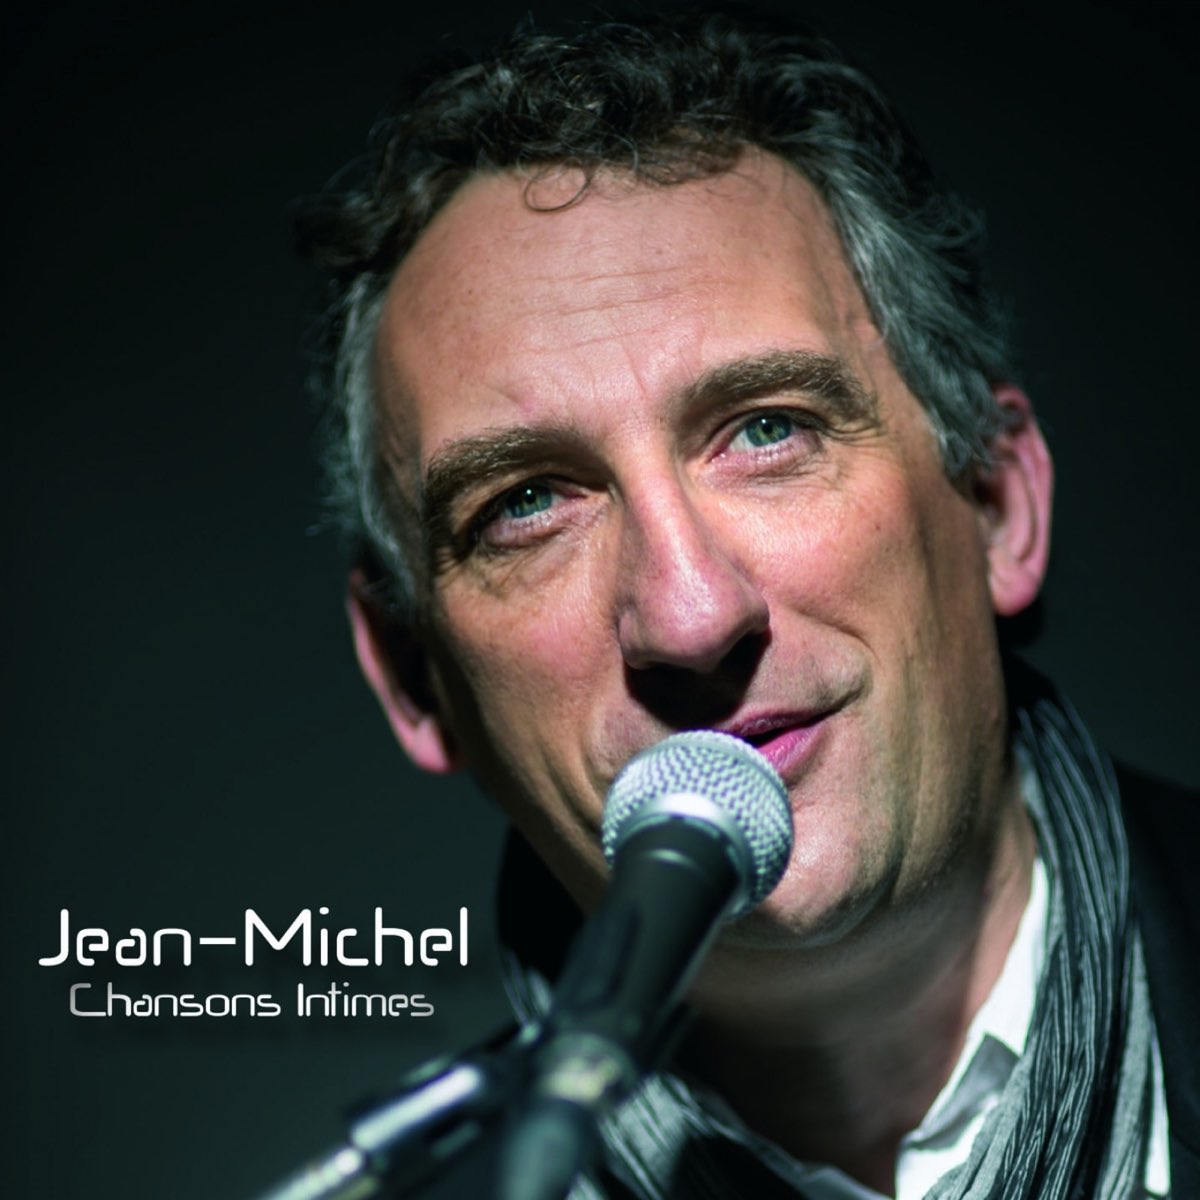 Chansons intimes by Jean Michel on Apple Music